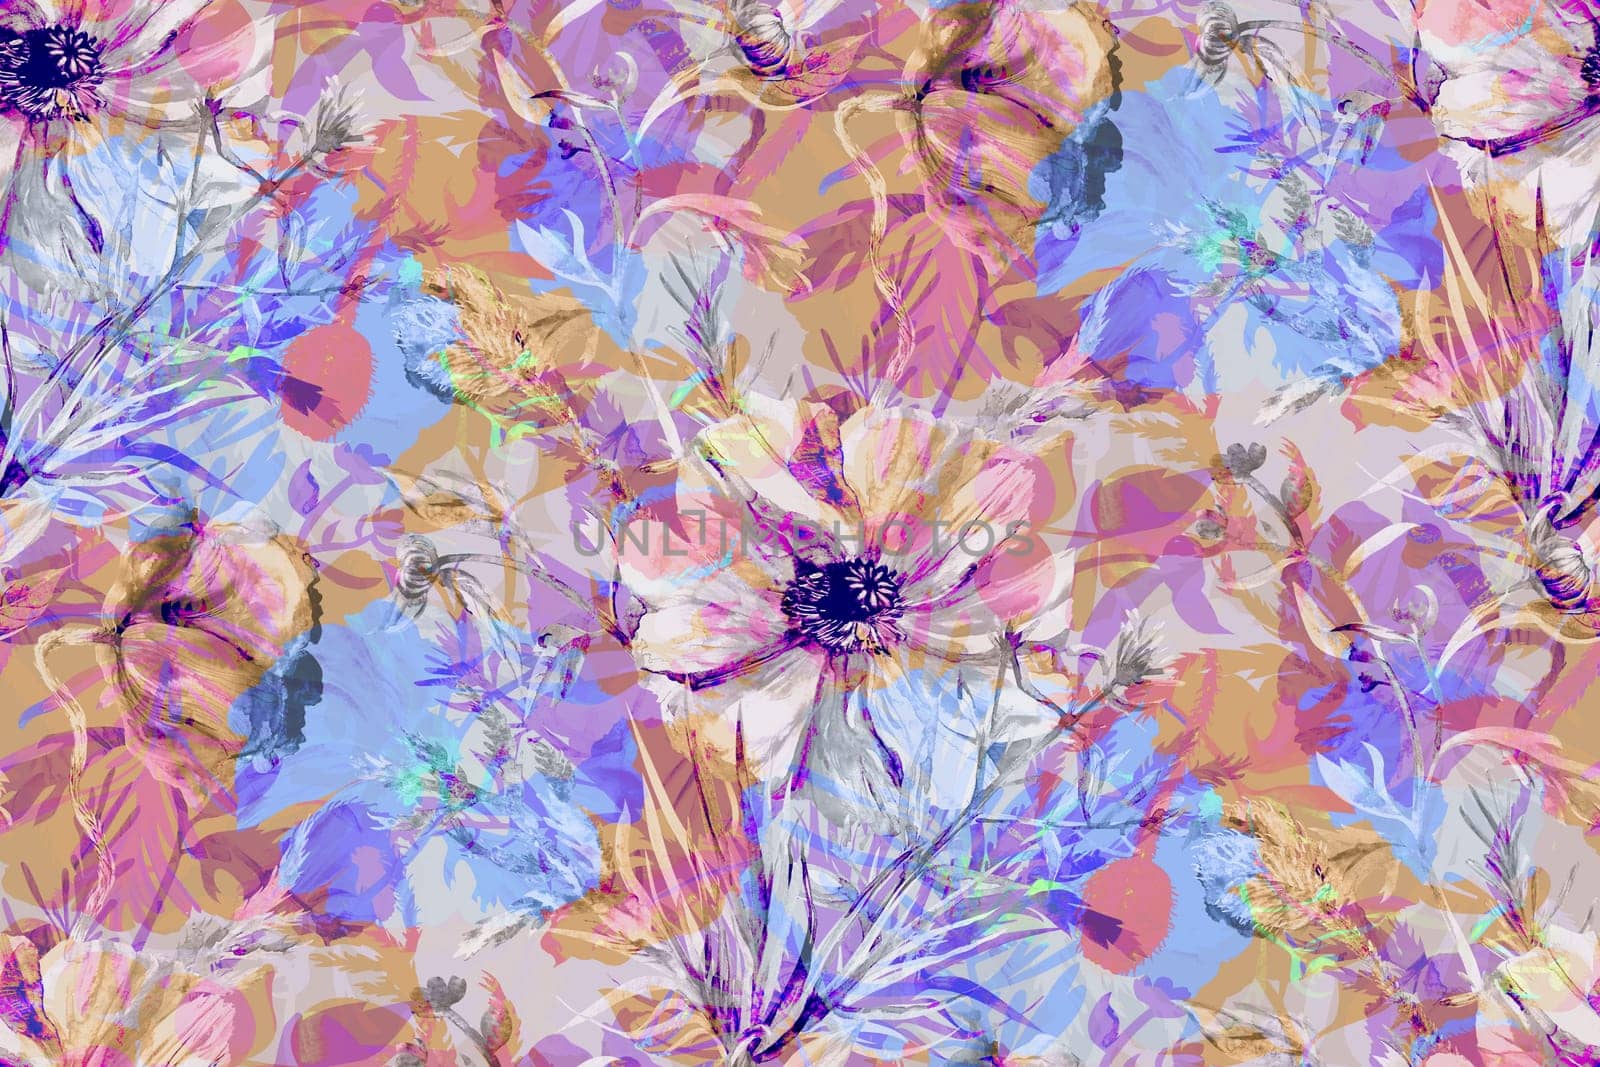 Multicolored summer pattern with poppy flowers and herbs. High quality illustration